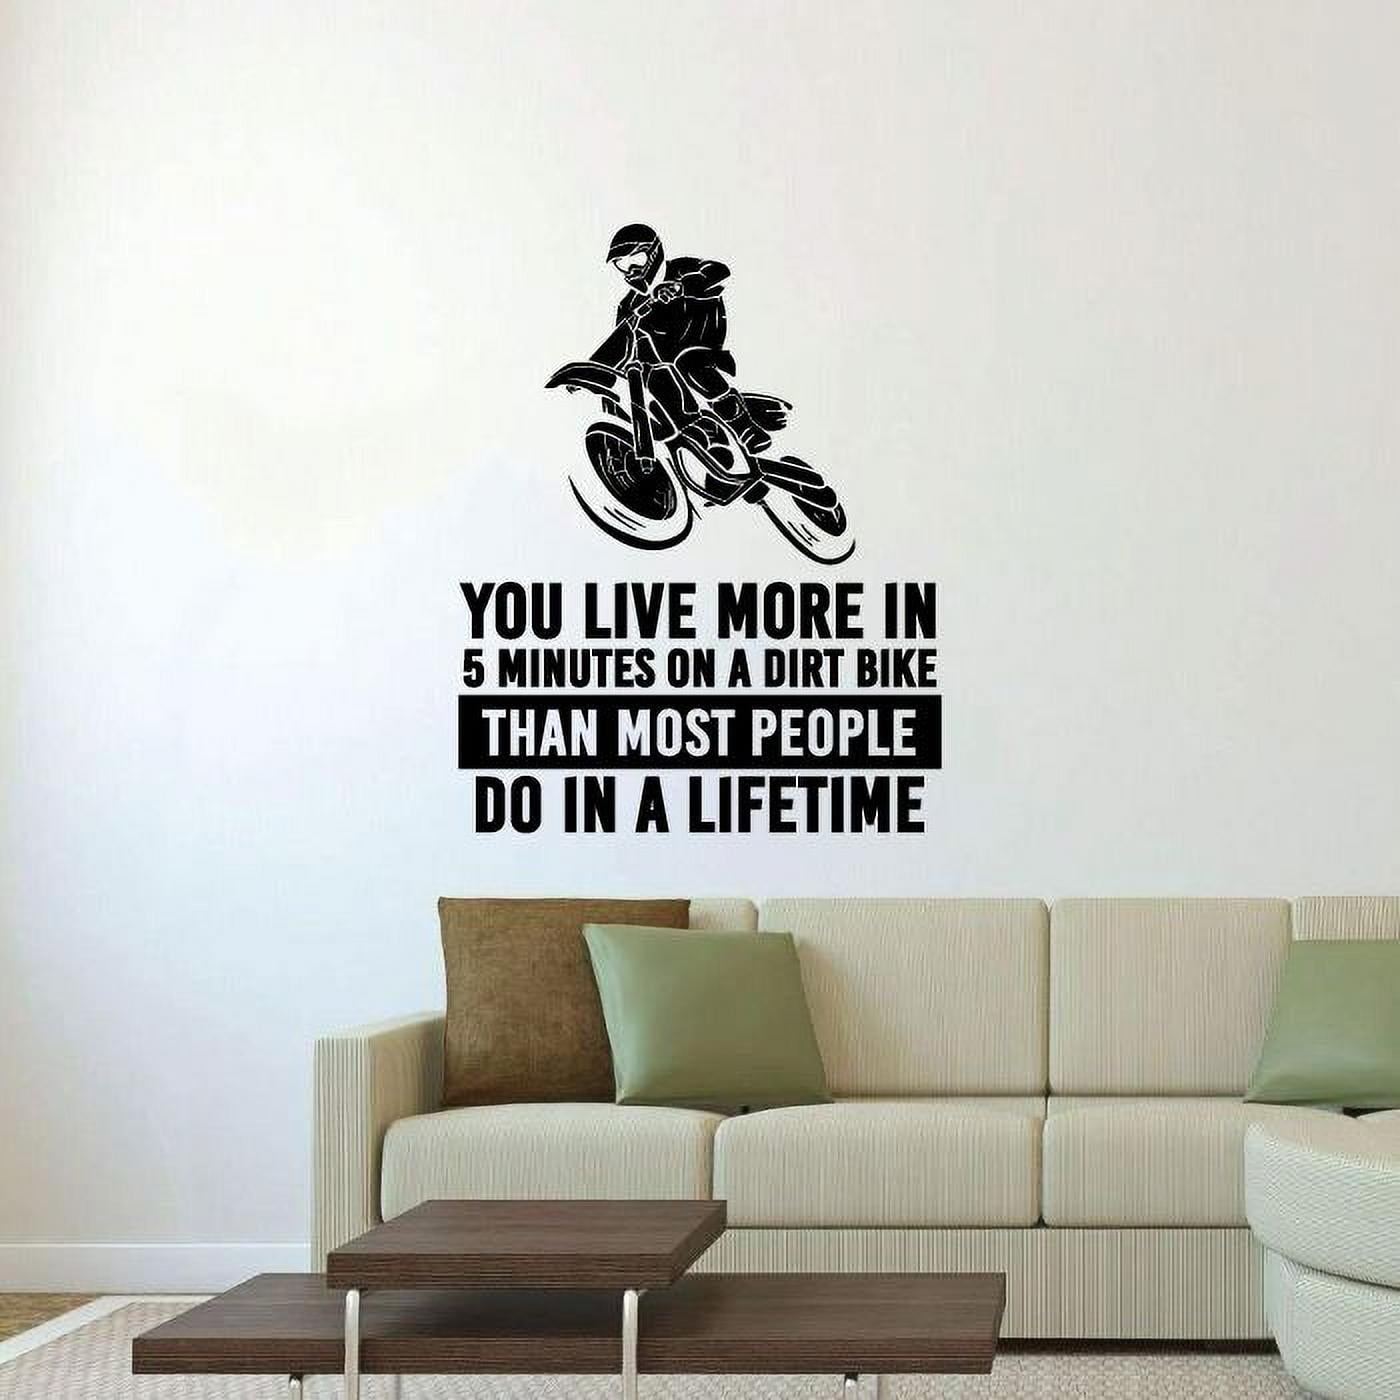 Motocross Vinyl Wall Decal Motorcycle Moto Wall Art Home Decals For Living Room 